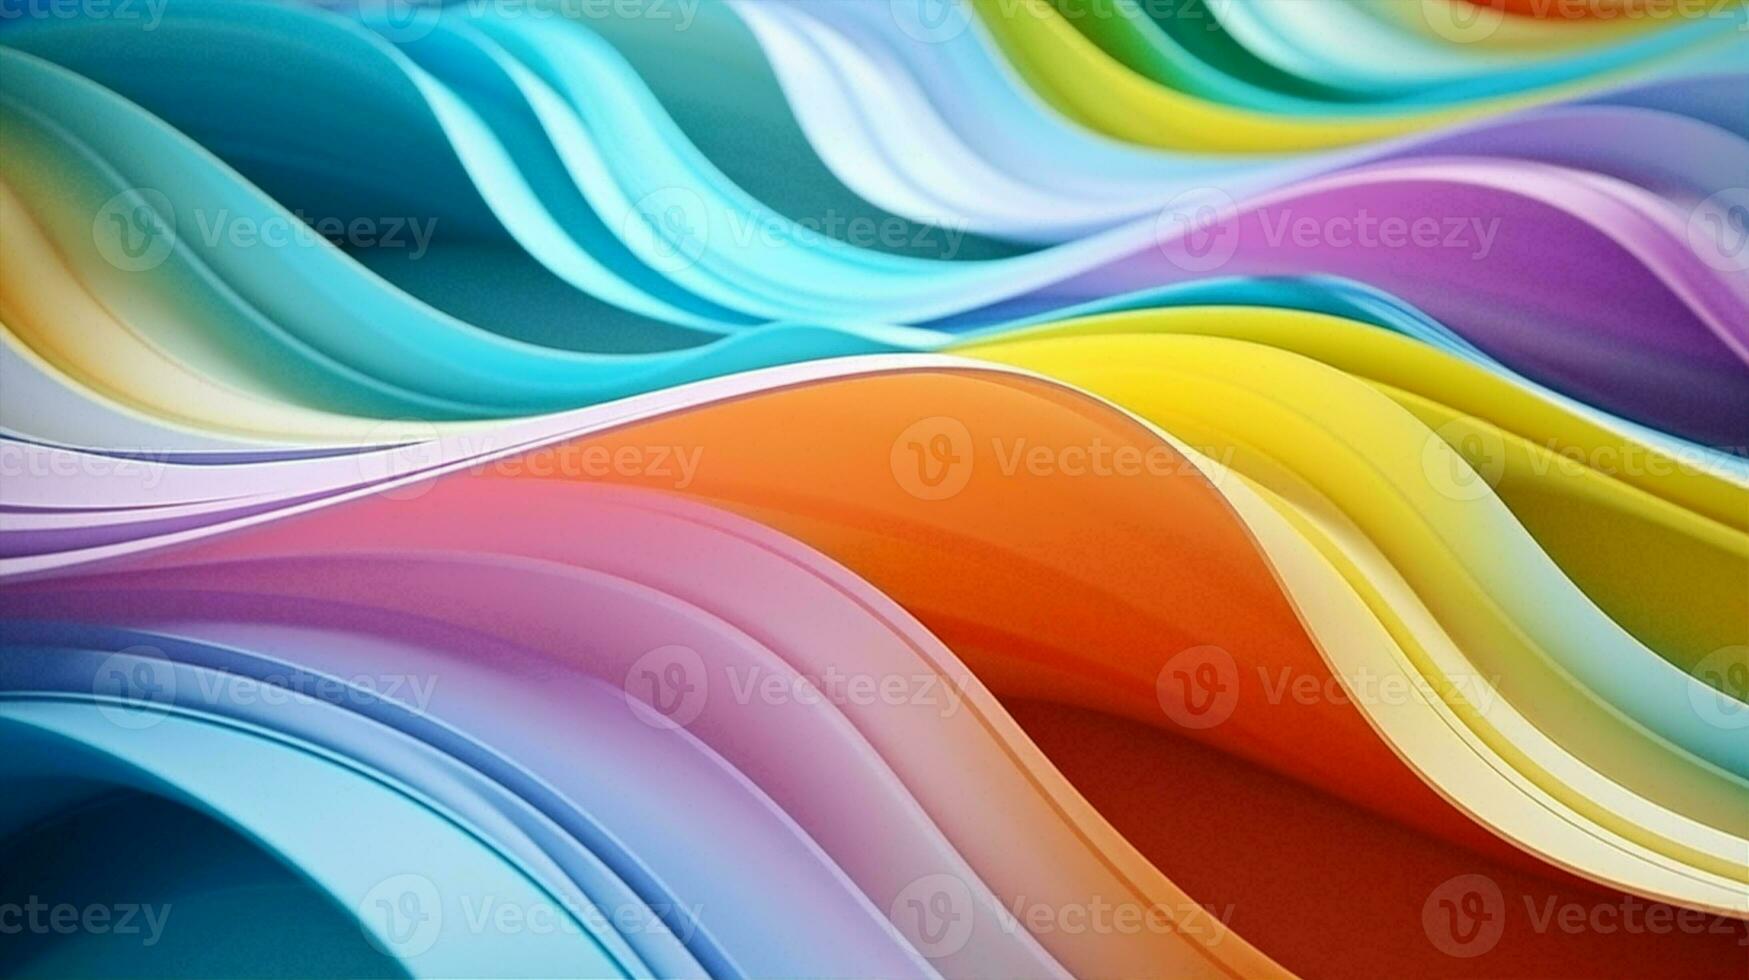 Pattern vibrant lines background paint rainbow abstract colorful design bright graphic art decorative photo